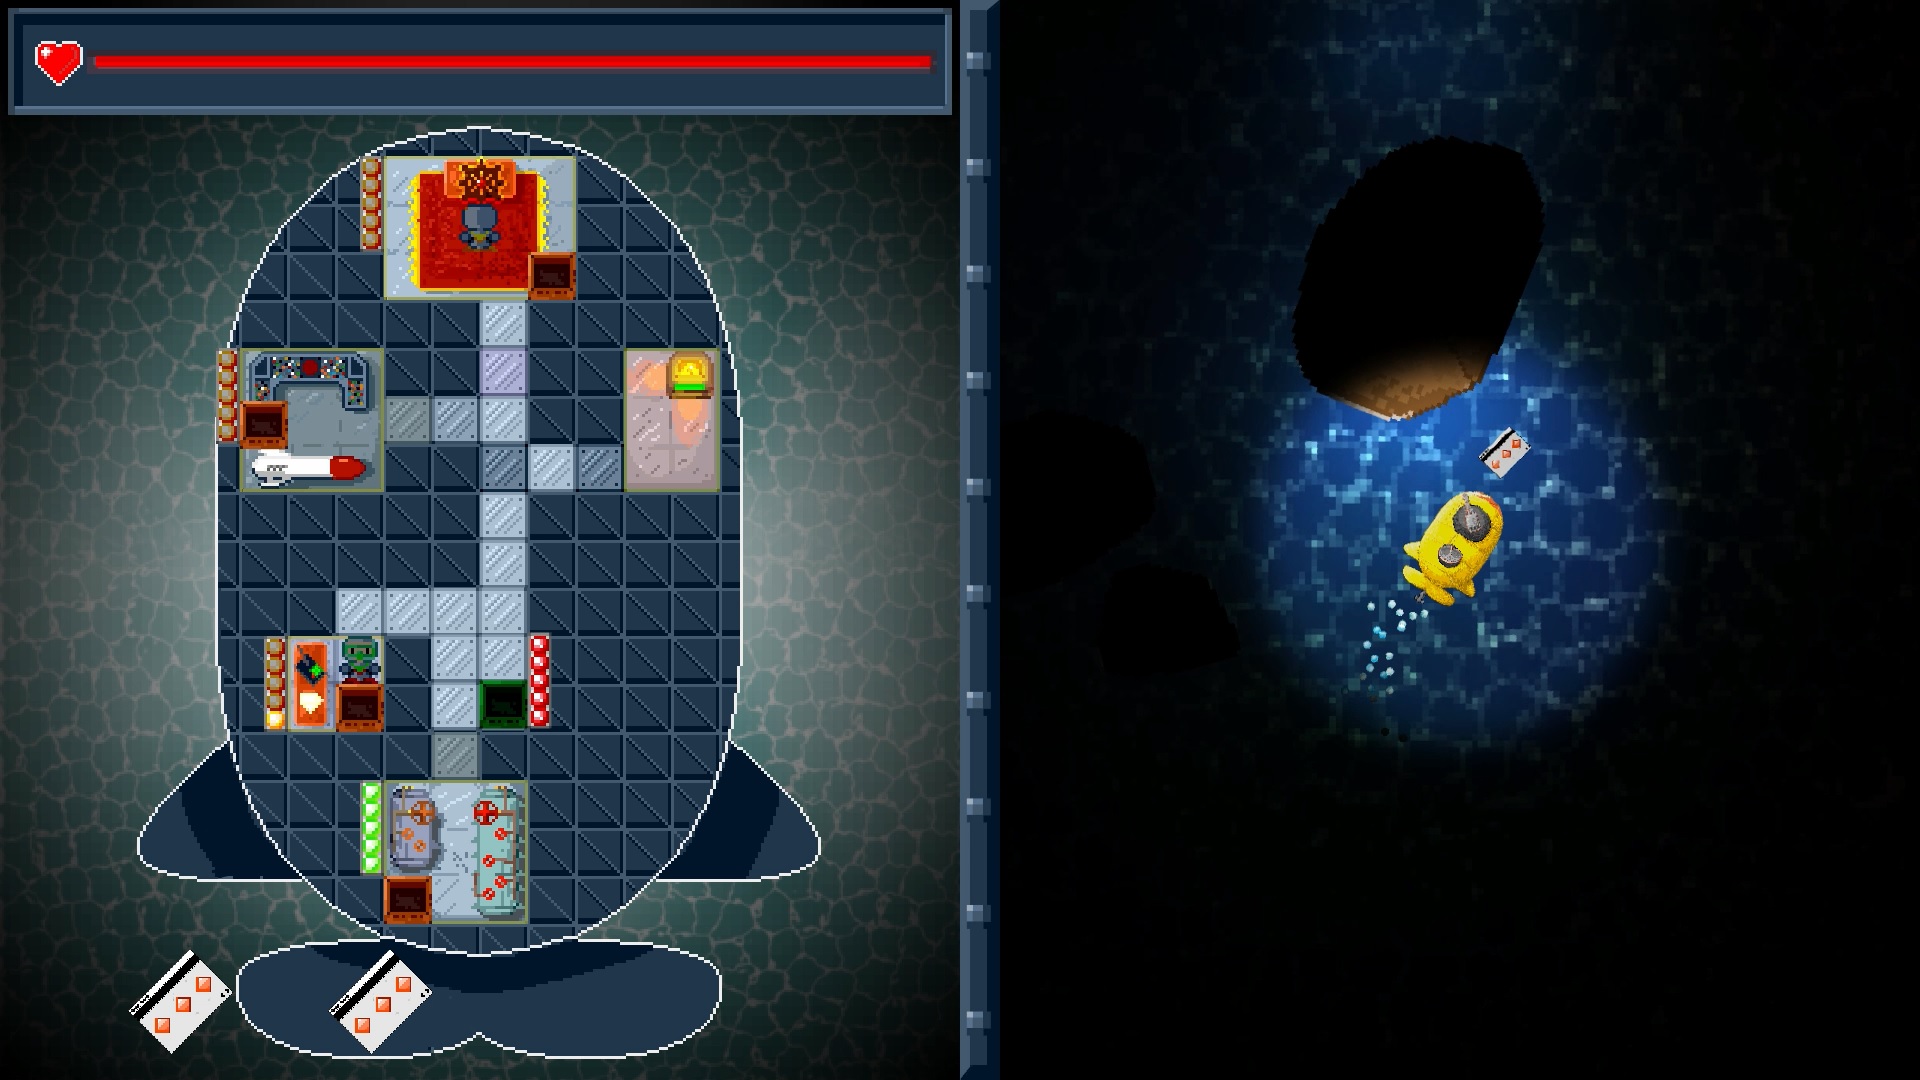 Gameplay of S.U.B., the inside of the submarine (left) controls the submarine in the ocean (right)